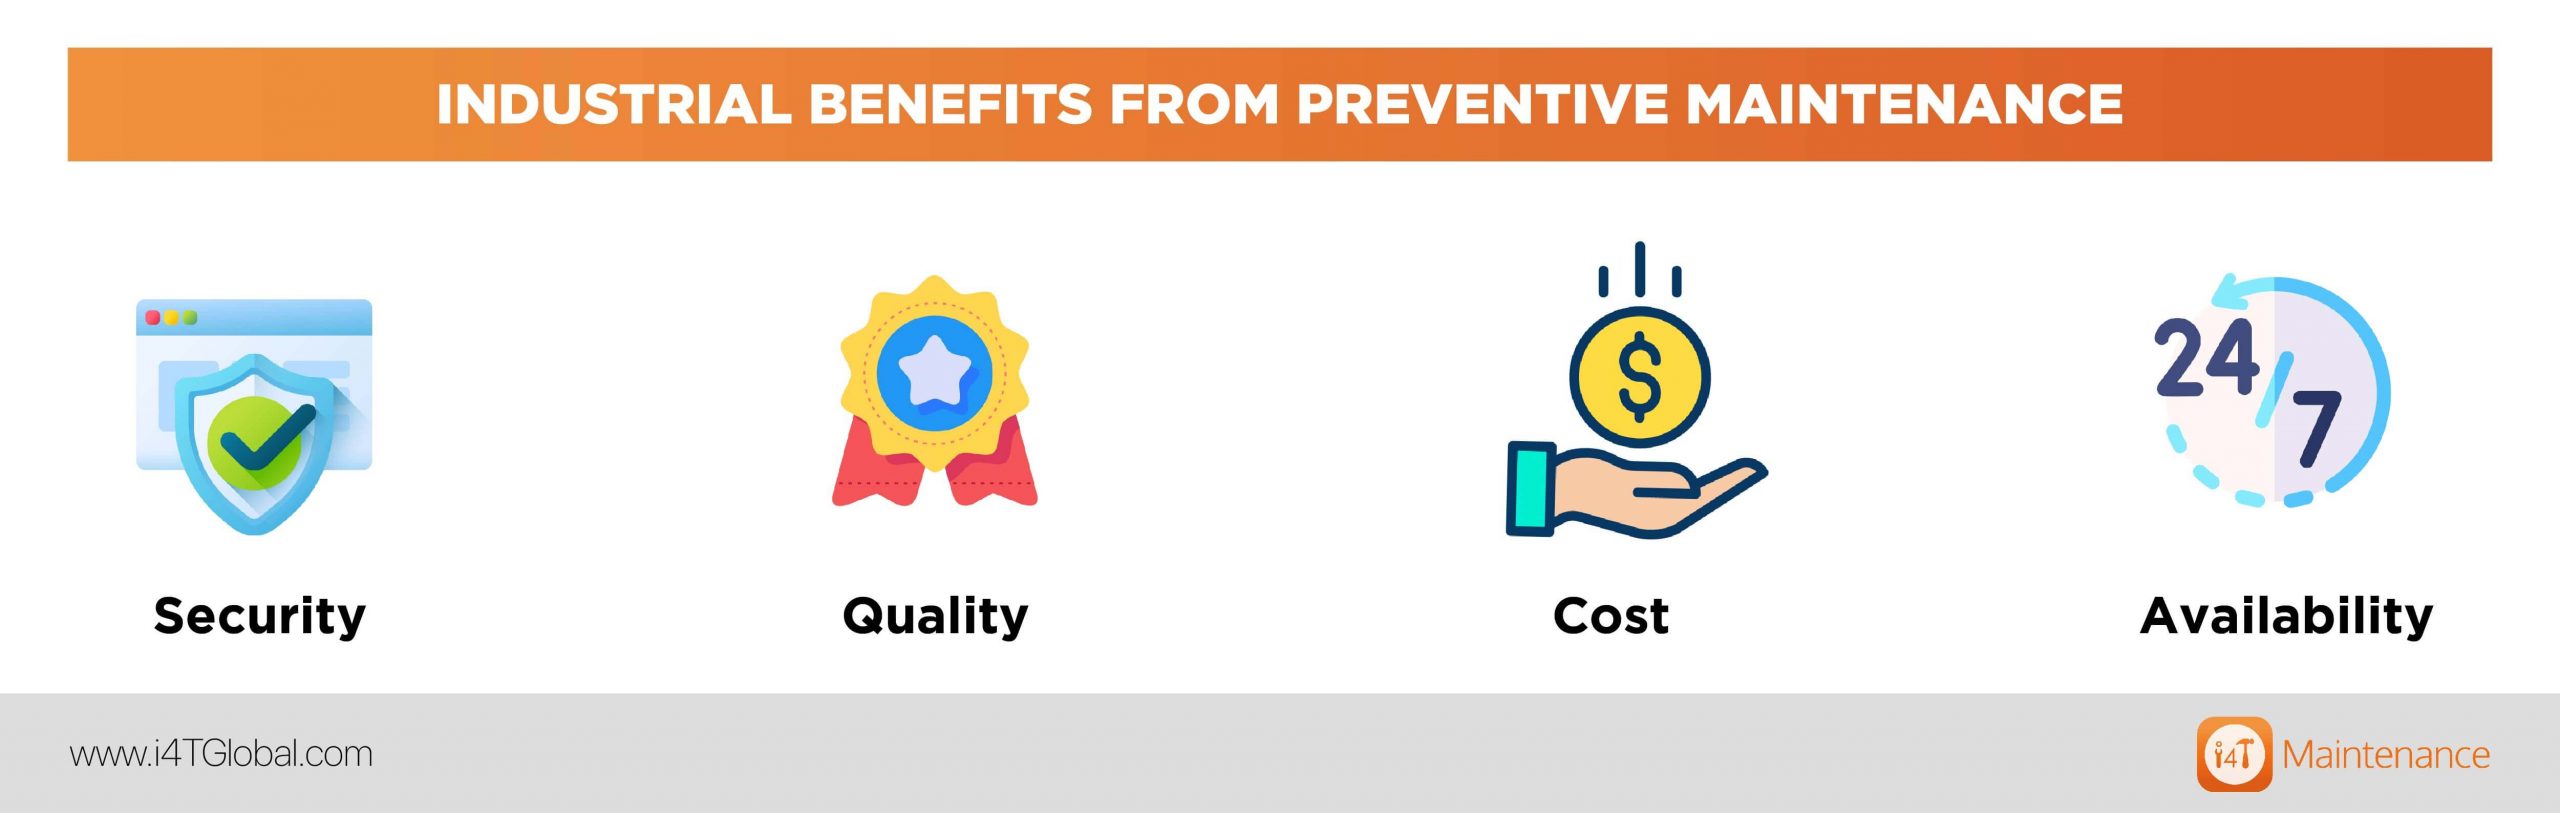 4 industrial benefits from preventive maintenance - i4T Global